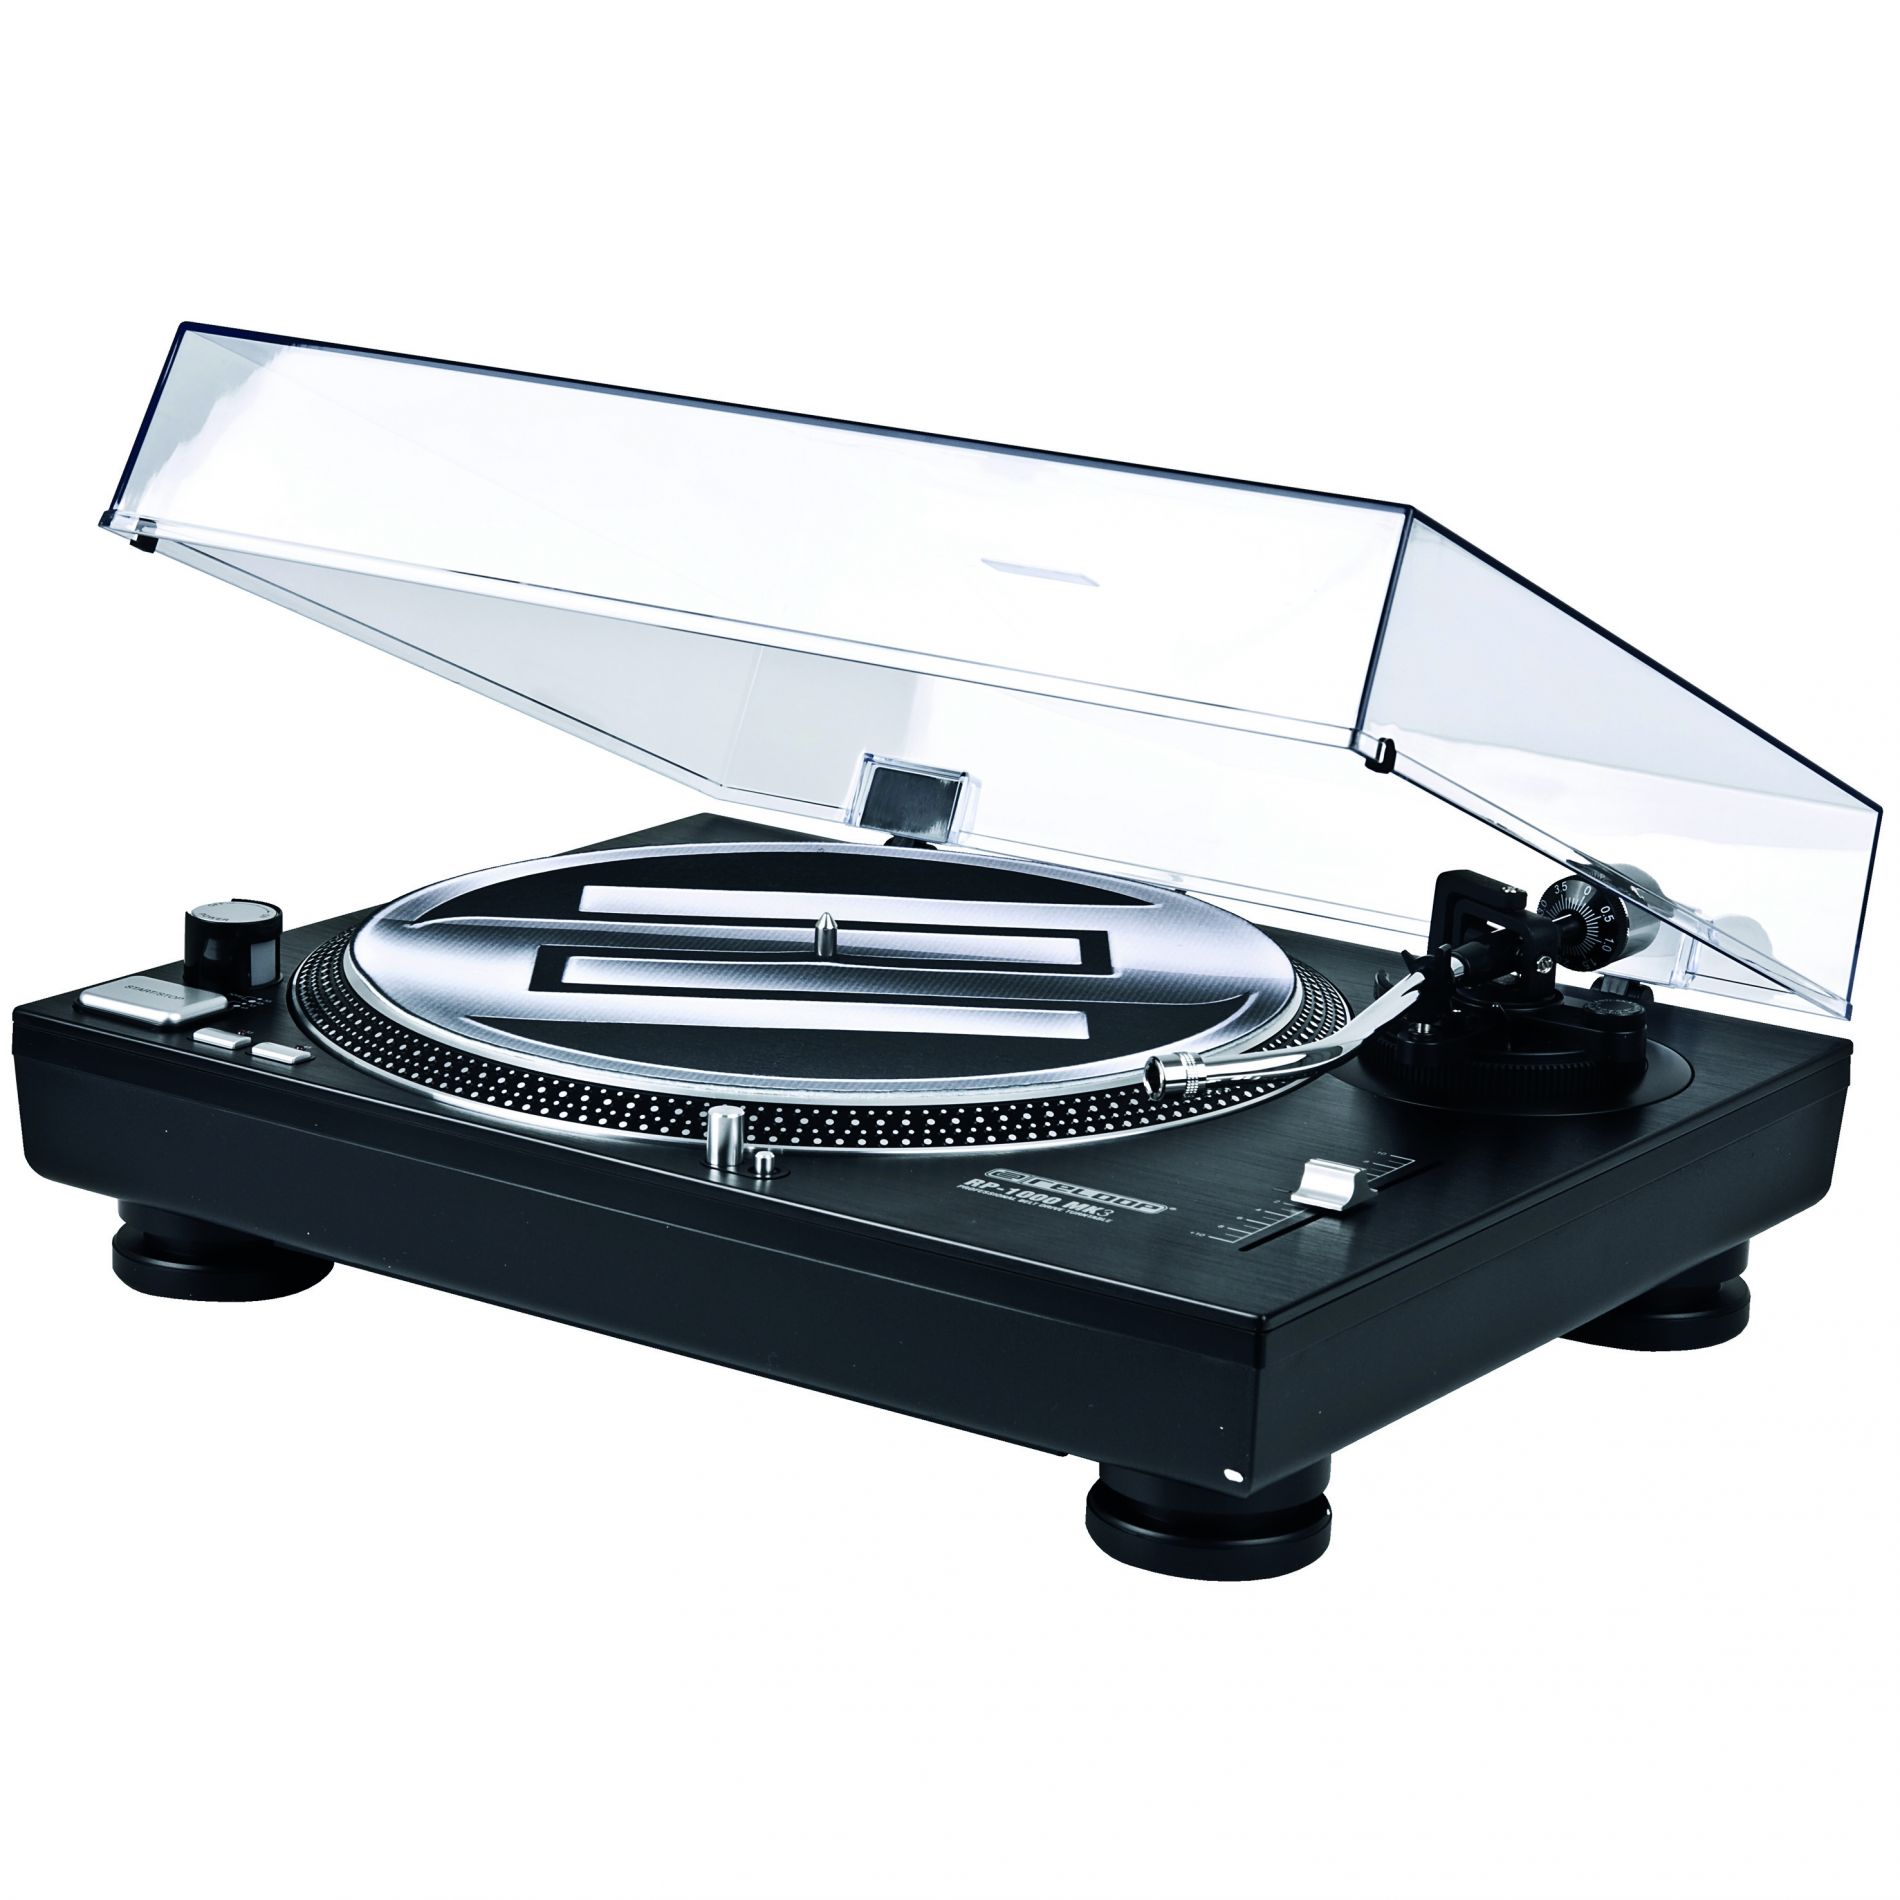 Reloop Dust Cover Rp1000 2000 4000 - Turntable cover - Variation 1